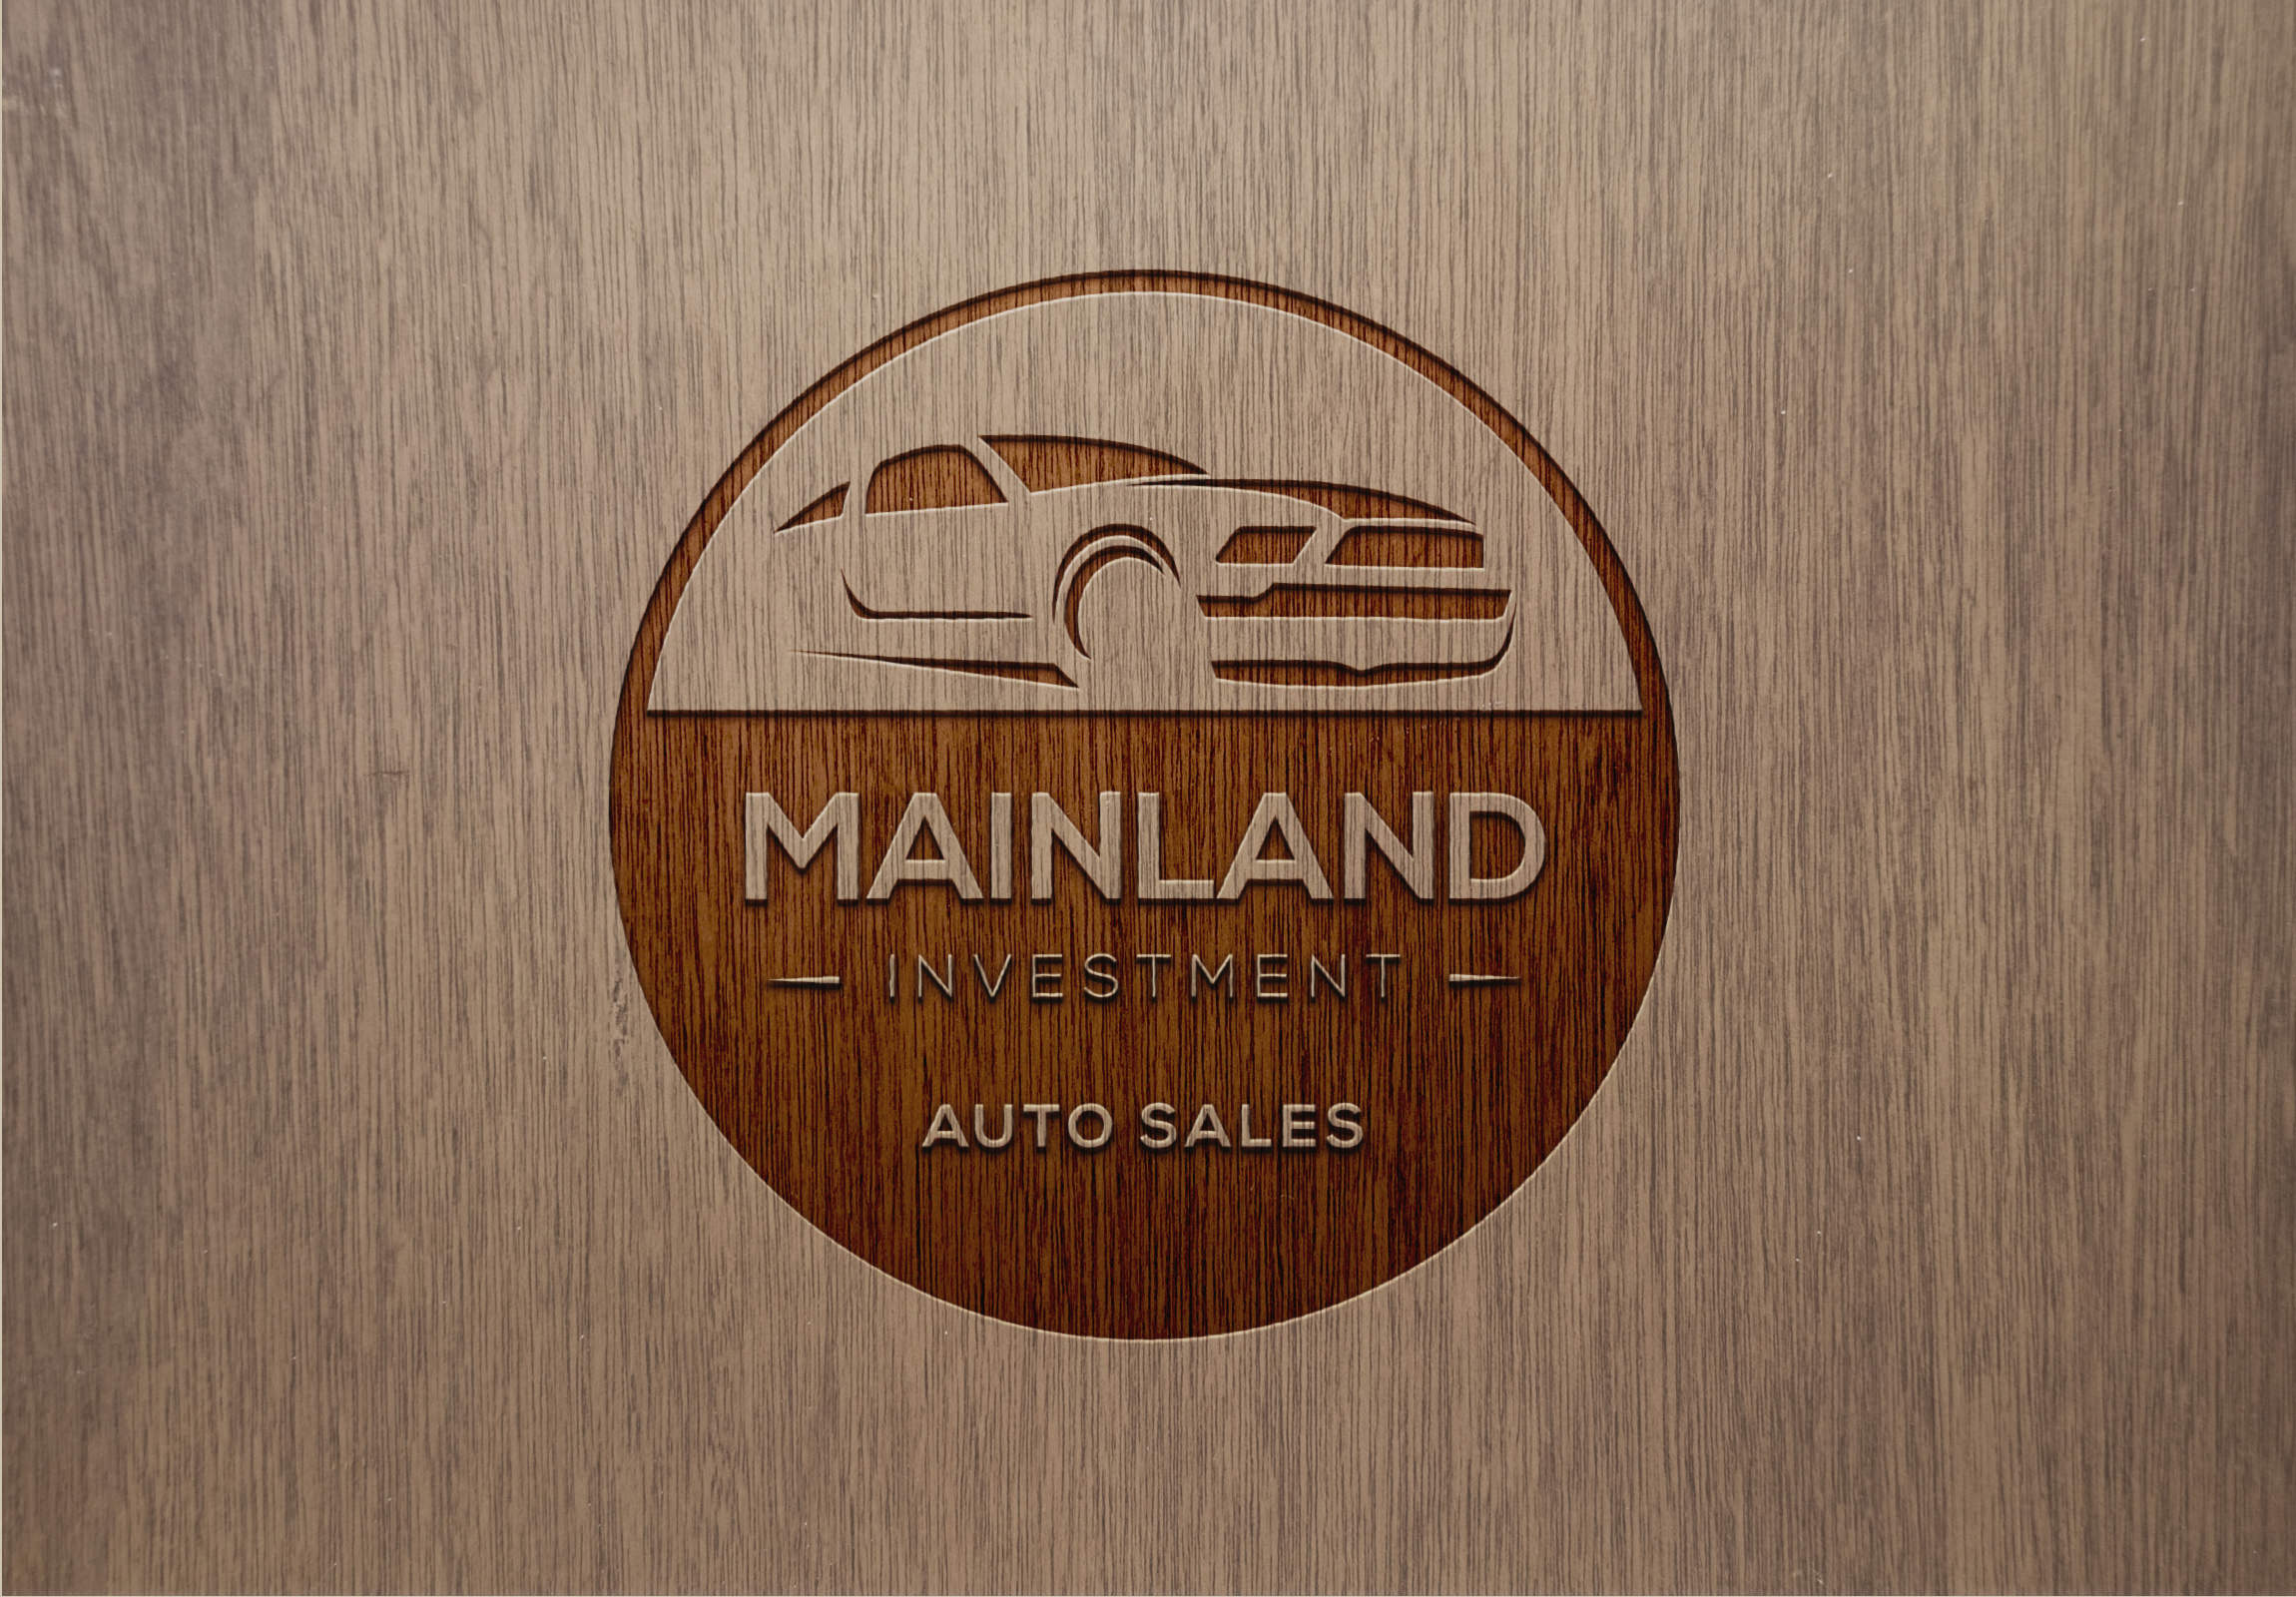 Company Logo For Mainland Investment Auto Sales'